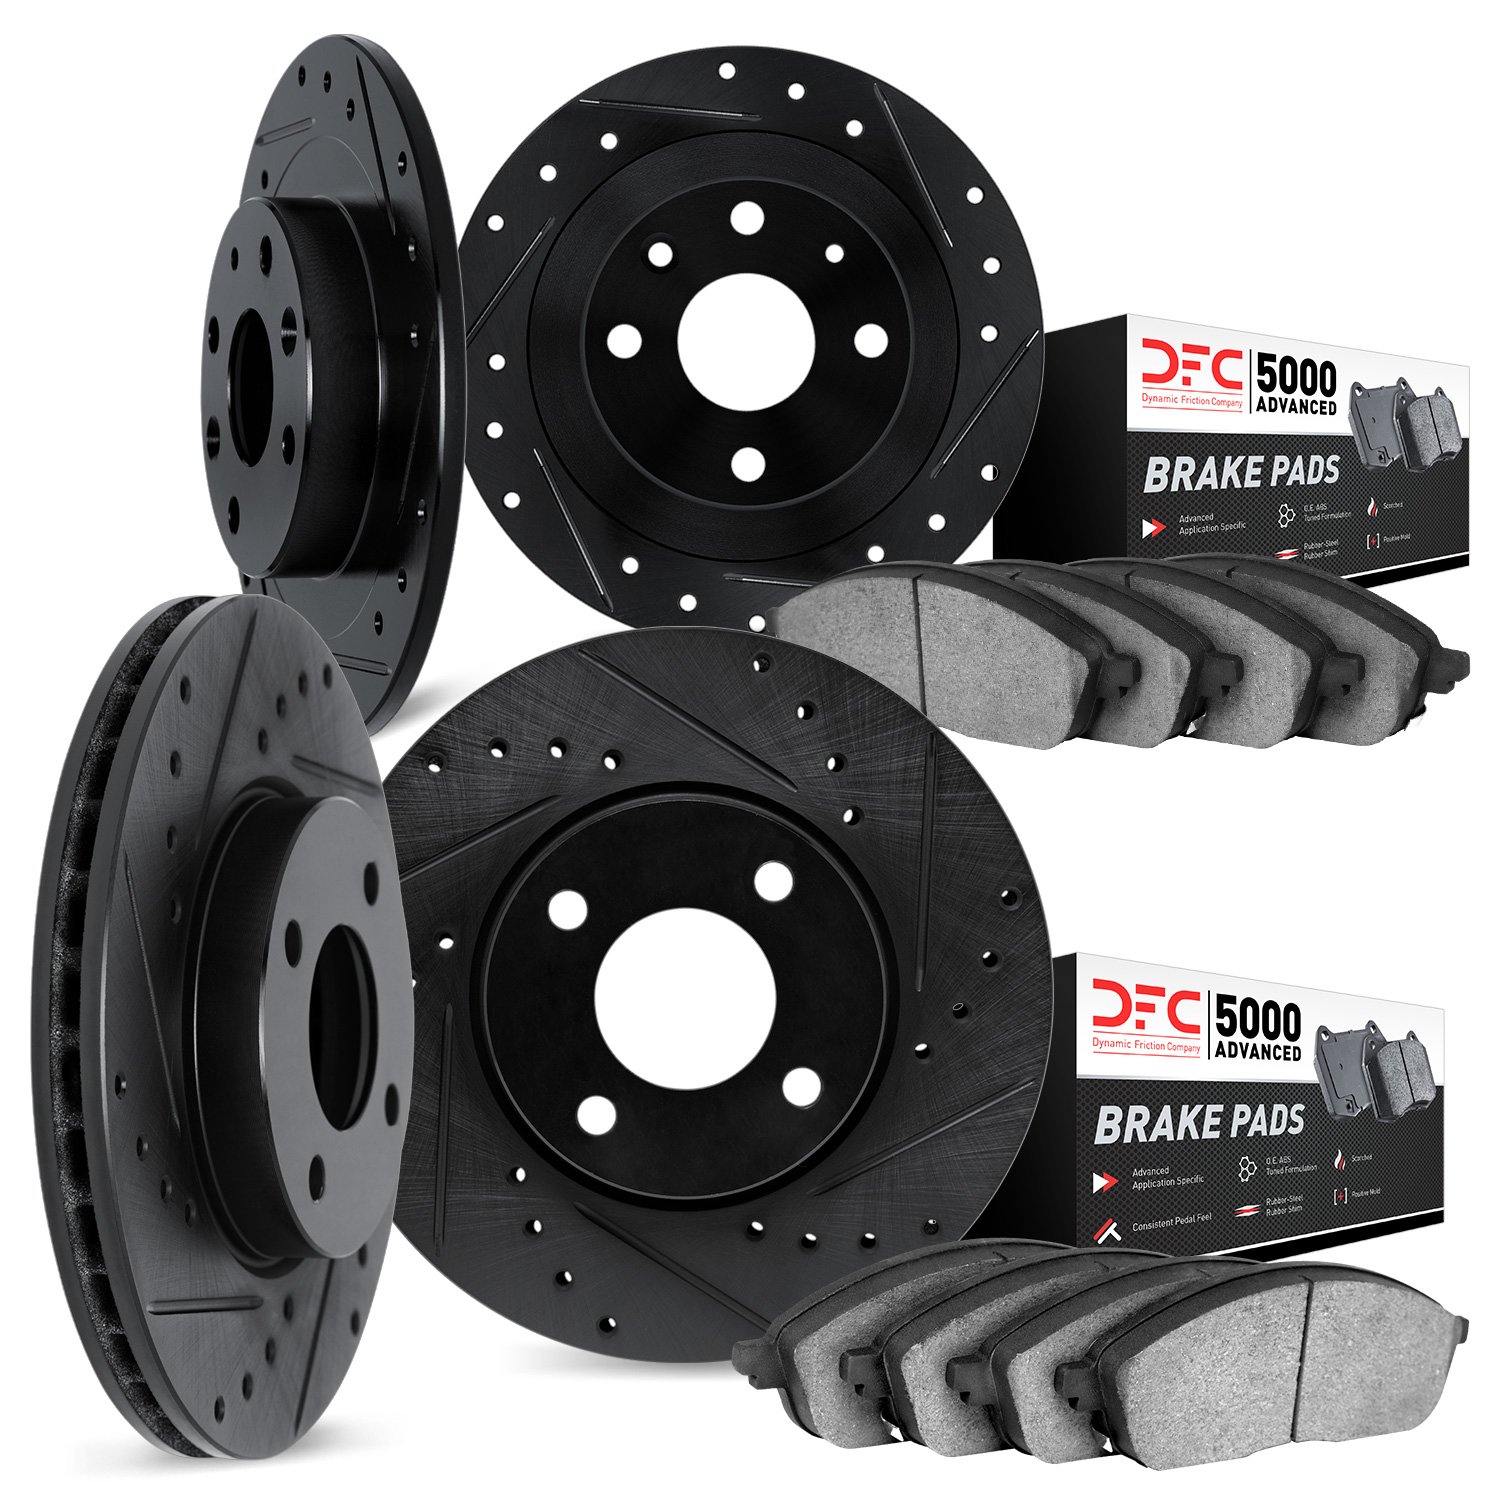 8504-32001 Drilled/Slotted Brake Rotors w/5000 Advanced Brake Pads Kit [Black], 2007-2015 Mini, Position: Front and Rear